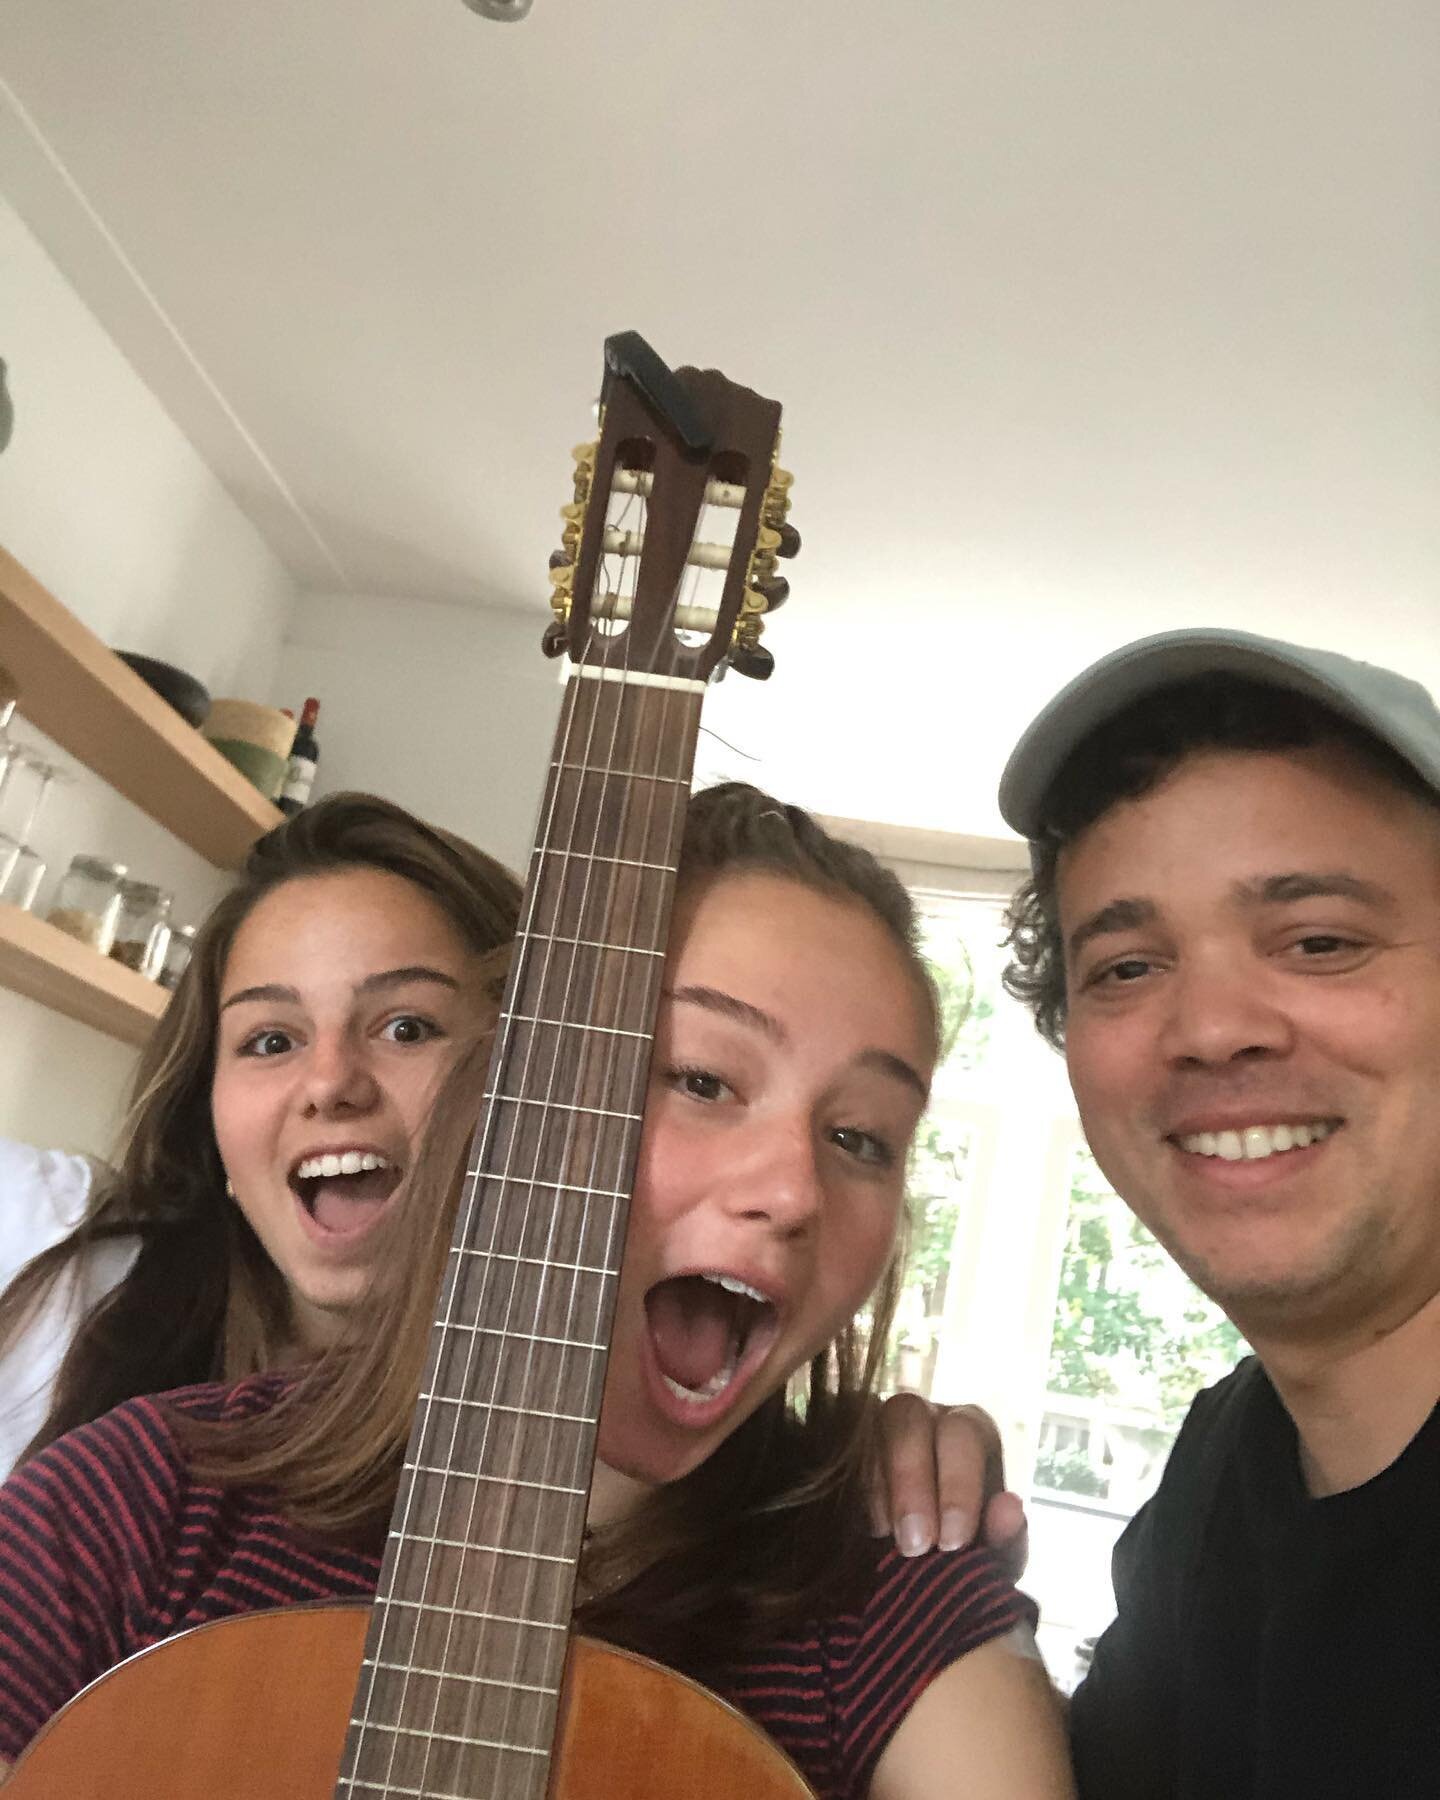 Last session with sisters Noa and Tess after about 5 years of piano and guitar lessons ( they finished high school). Wishing them all the best during their travels and adventures this coming year.